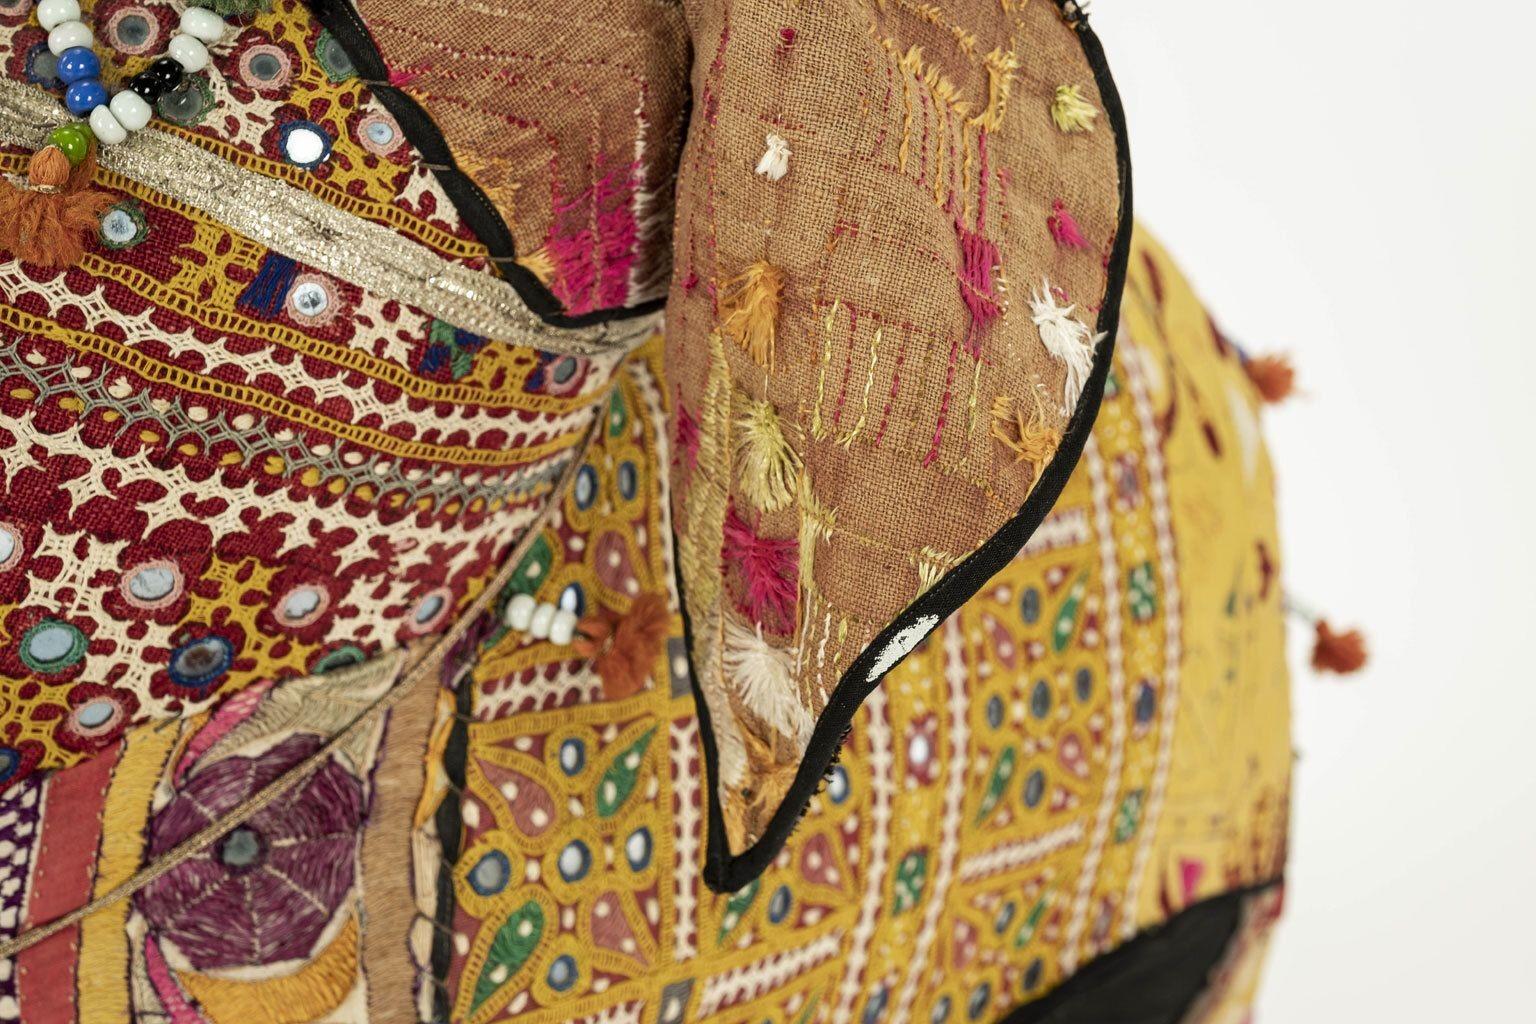 Mid-20th Century Massive Vintage Cotton Elephant Covered in Indian Textiles For Sale